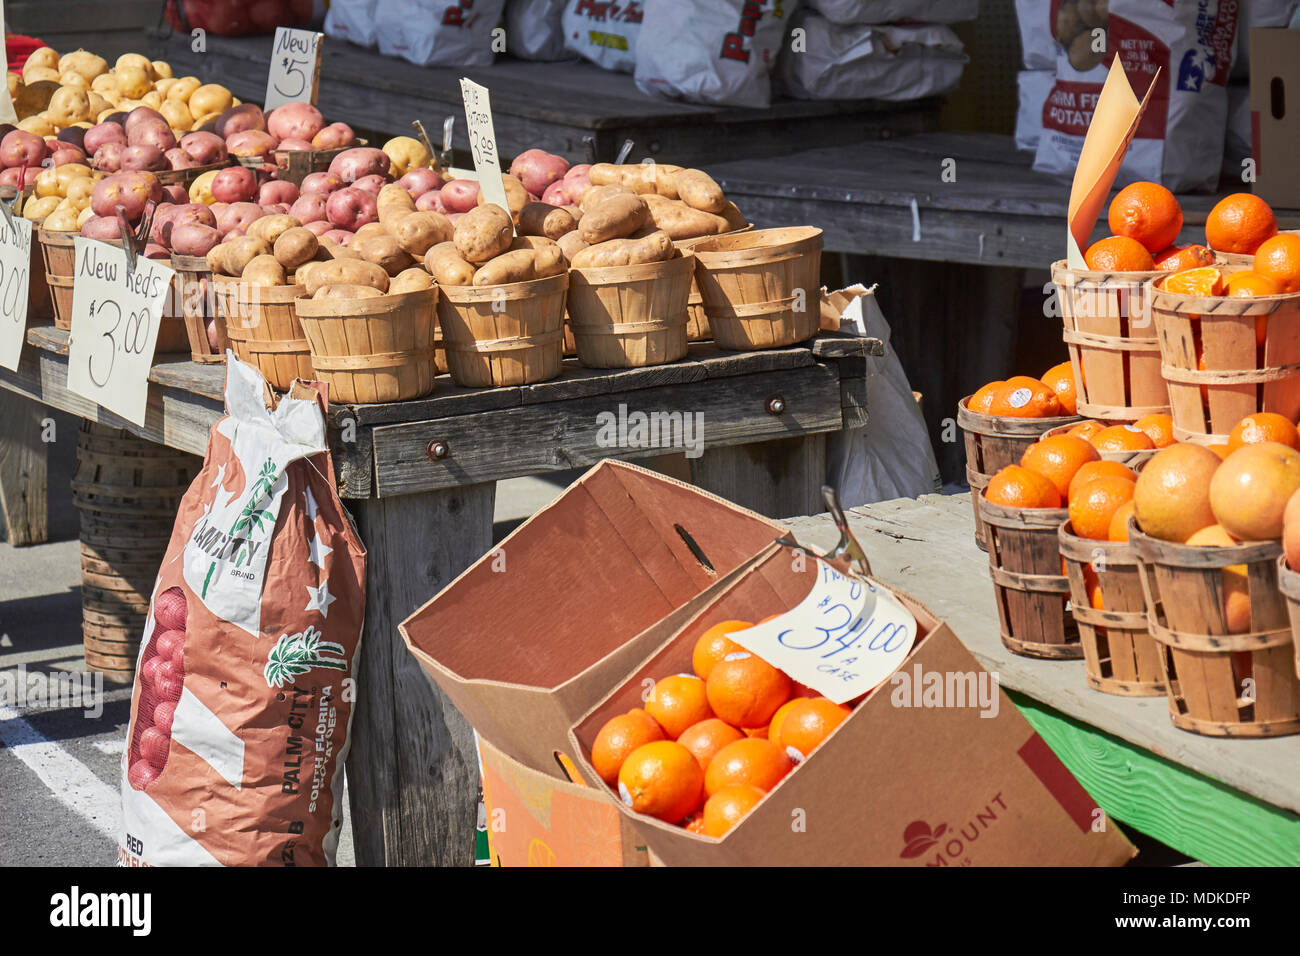 Potatoes and citrus on sale at the Green Dragon Market in Amish Country, Ephrata, Lancaster County, Pennsylvania, USA Stock Photo